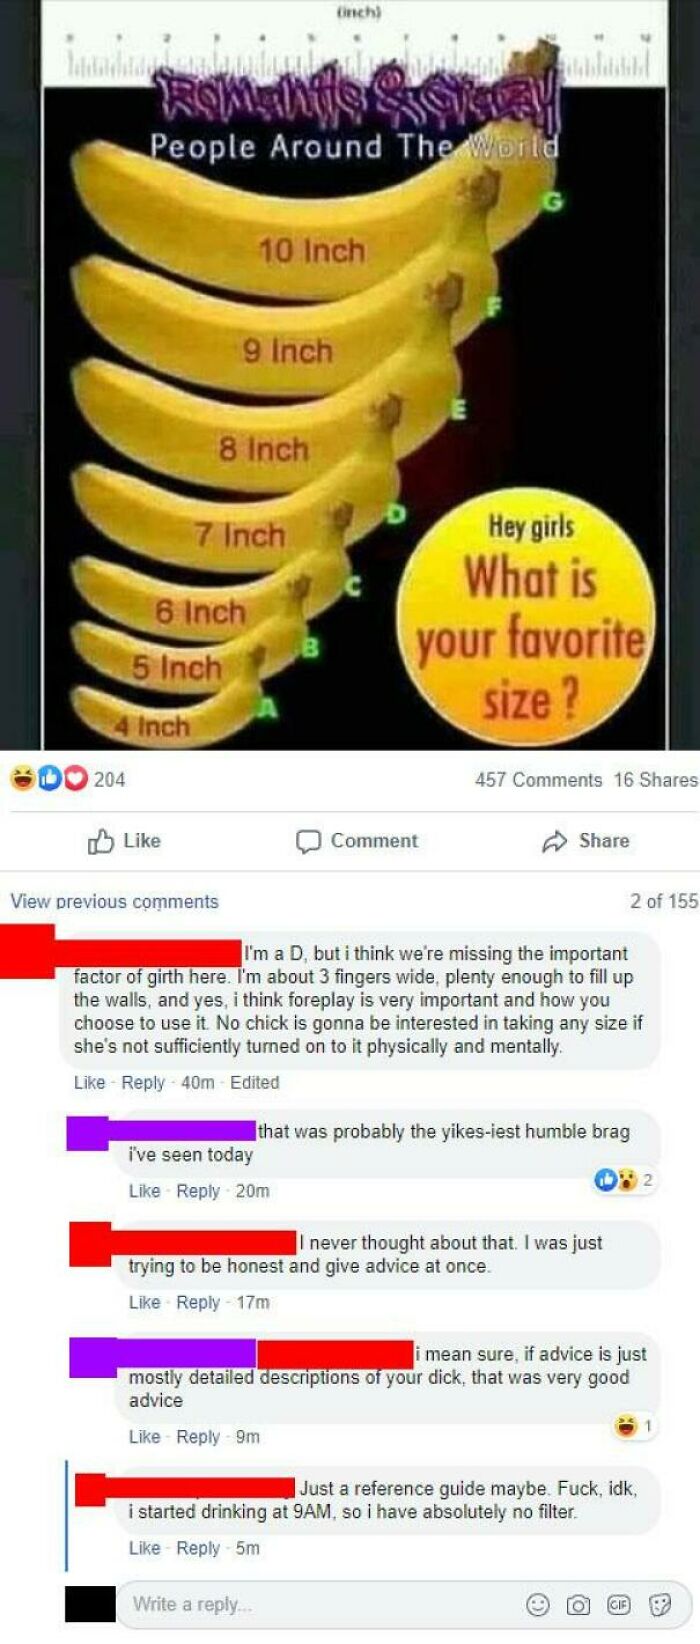 Most Comments Were Pretty Nice And Were About Actual Bananas But Then This Dude Decides To Come In